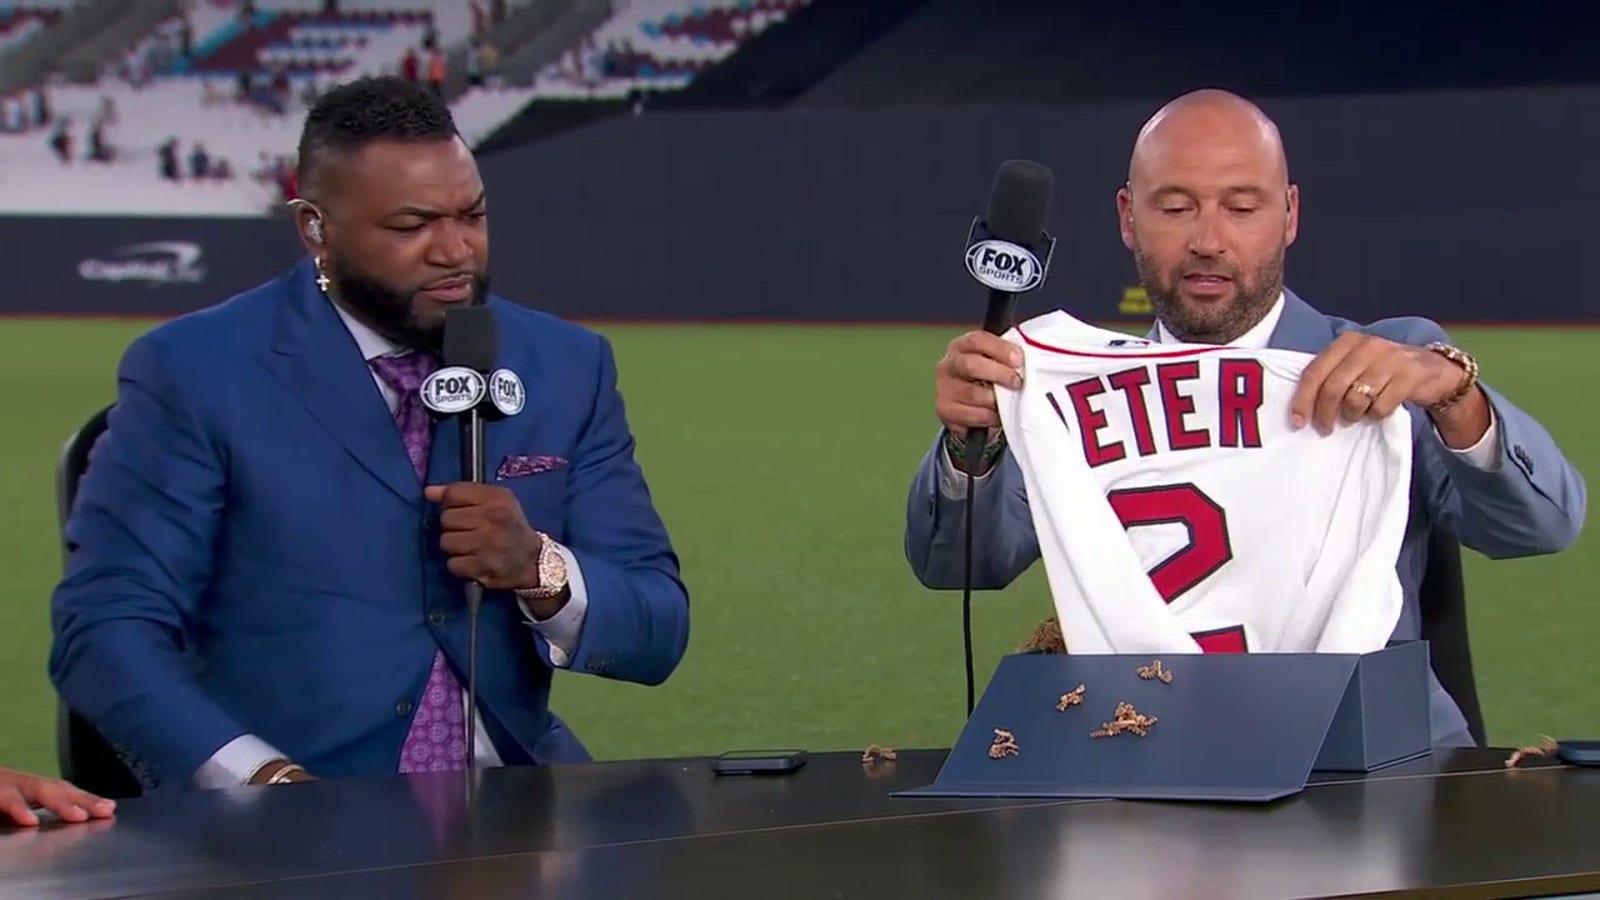 David Ortiz gives Derek Jeter a Red Sox jersey on his birthday